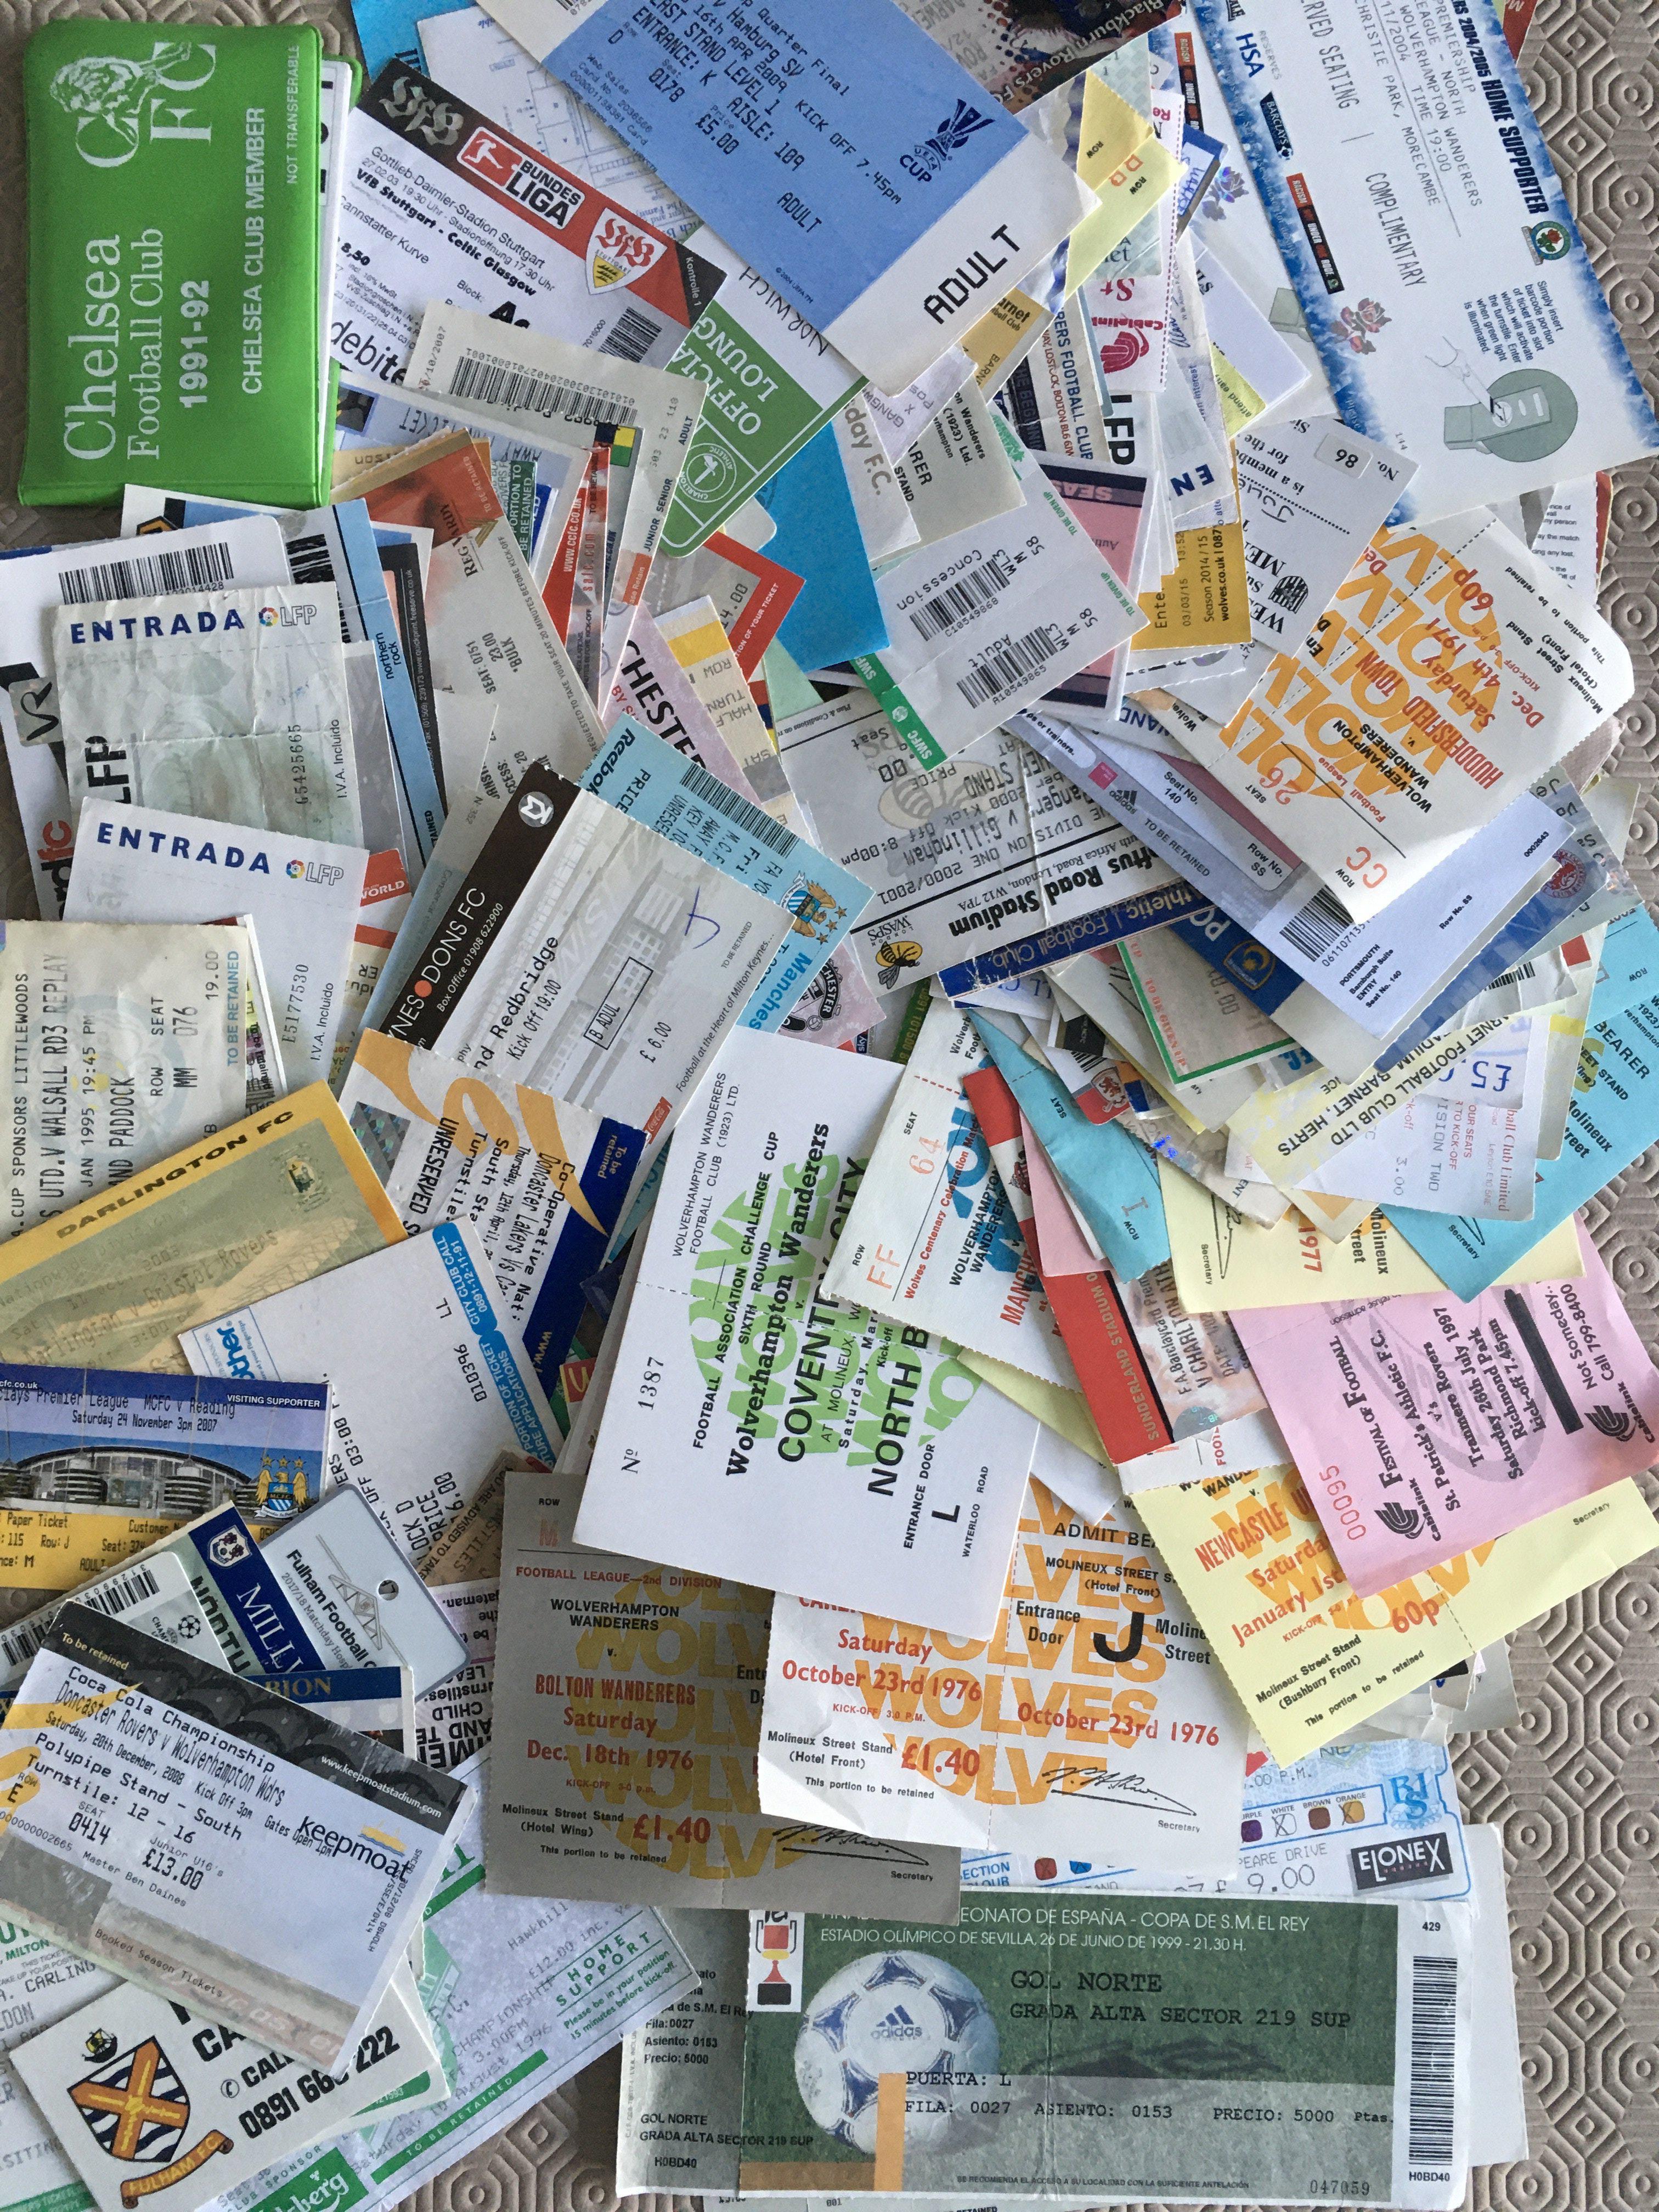 Football Ticket Collection: From the 70s onwards with a wide variety of clubs. (300+)